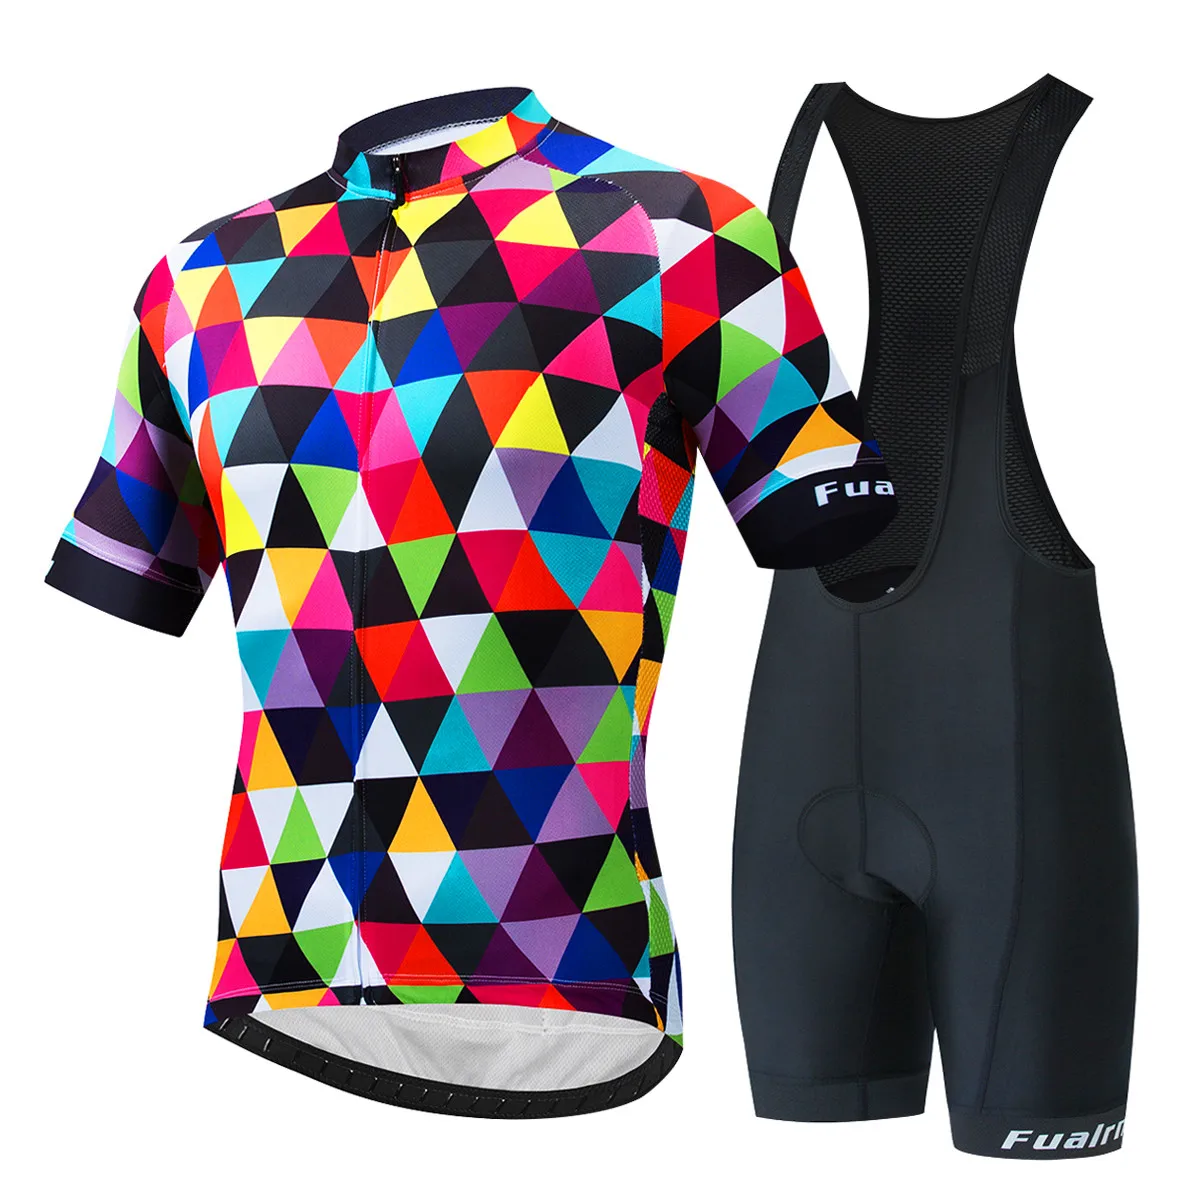 

2022 New Fualrny 100% Polyester Pro Cycling Jersey Set MTB Bicycle Clothes Sportswear Bike Clothing Maillot Ropa Ciclismo Cycli